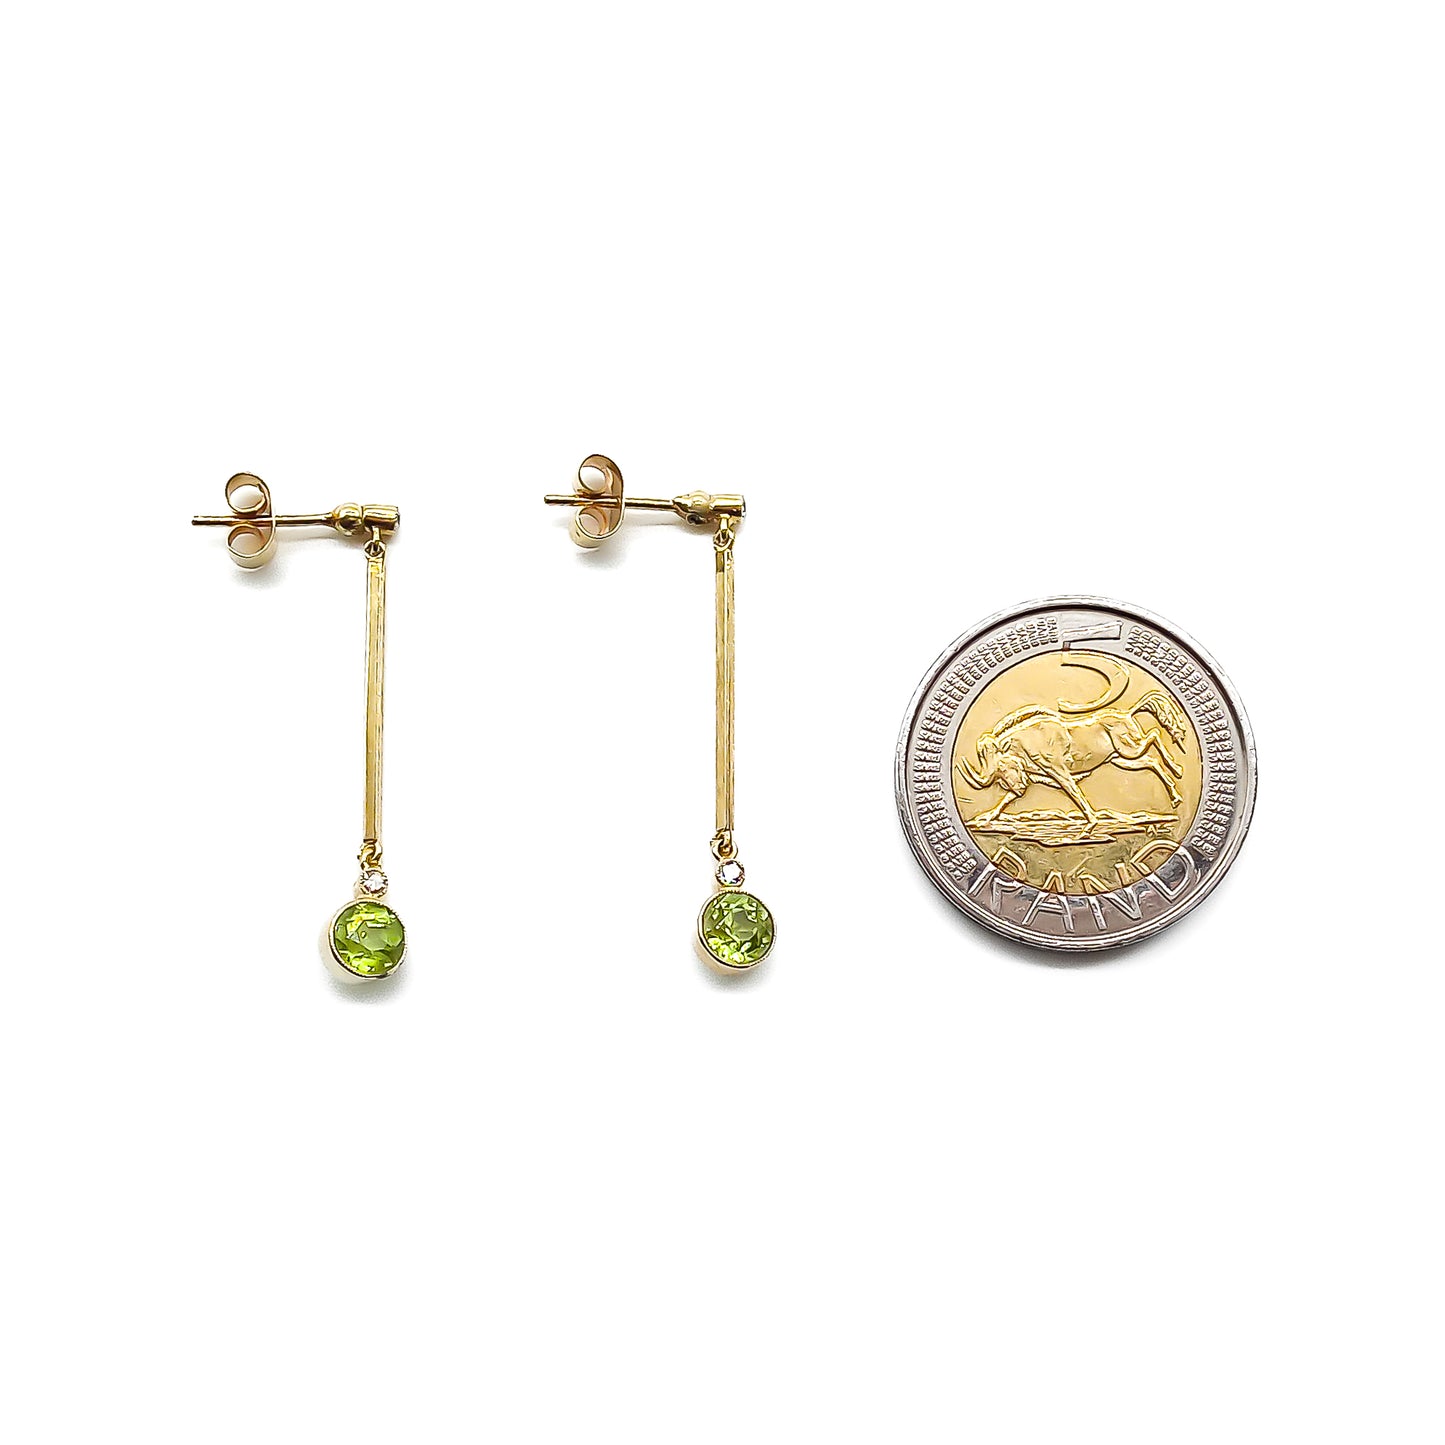 Classic 18ct gold drop earrings, each set with two small diamonds and a beautifully faceted peridot.